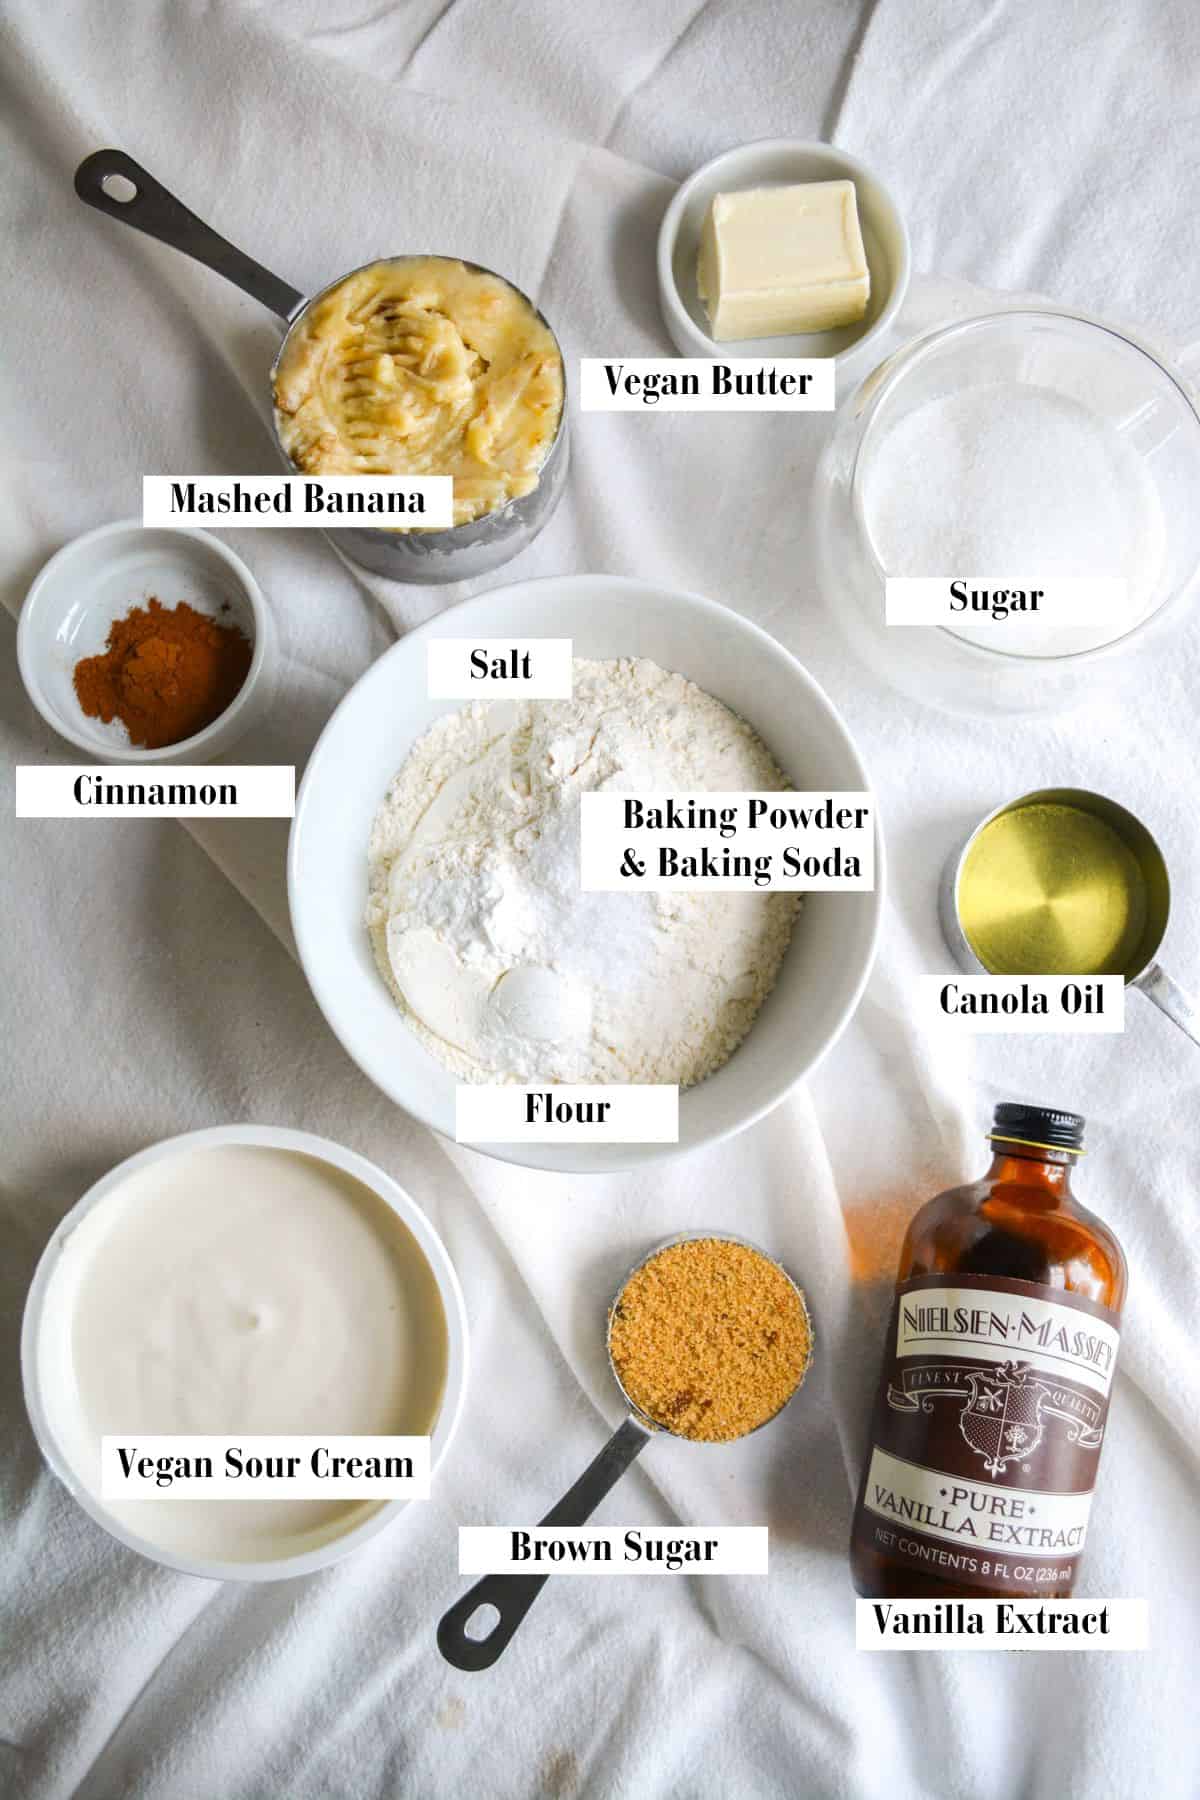 Overhead photo of ingredients needed to make this recipe.